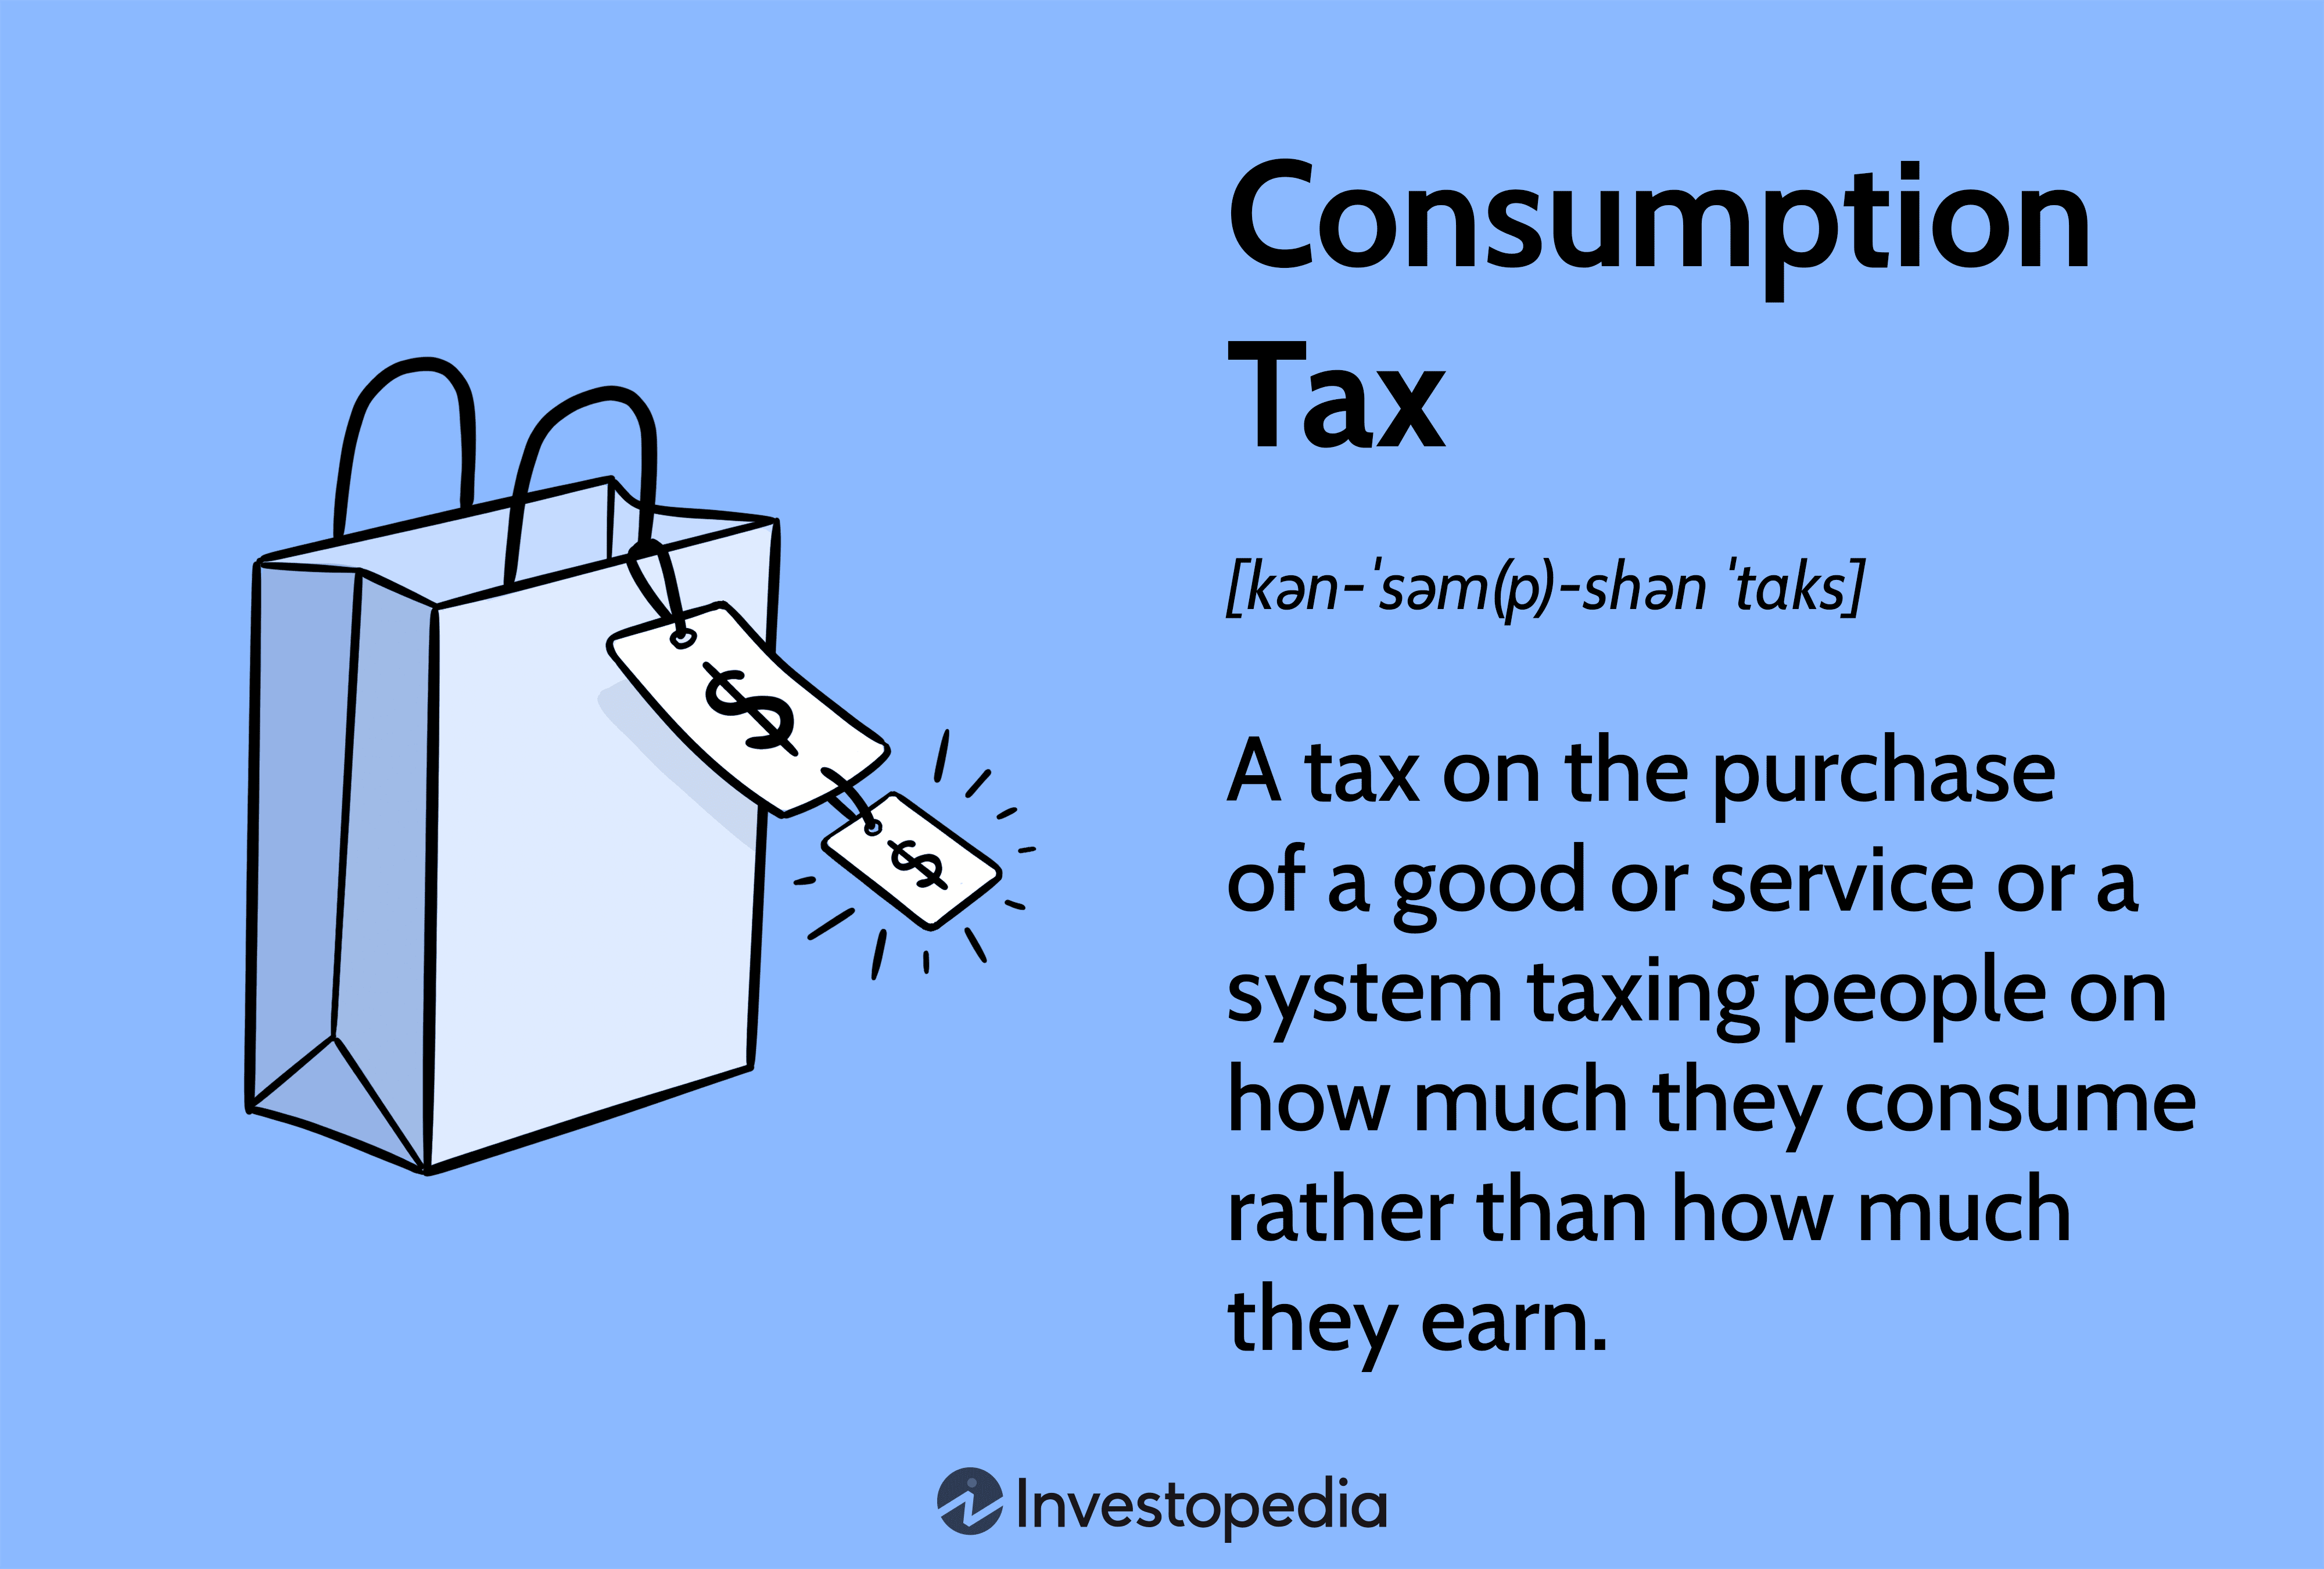 Consumption Tax: A tax on the purchase of a good or service or a system taxing people on how much they consume rather than how much they earn.